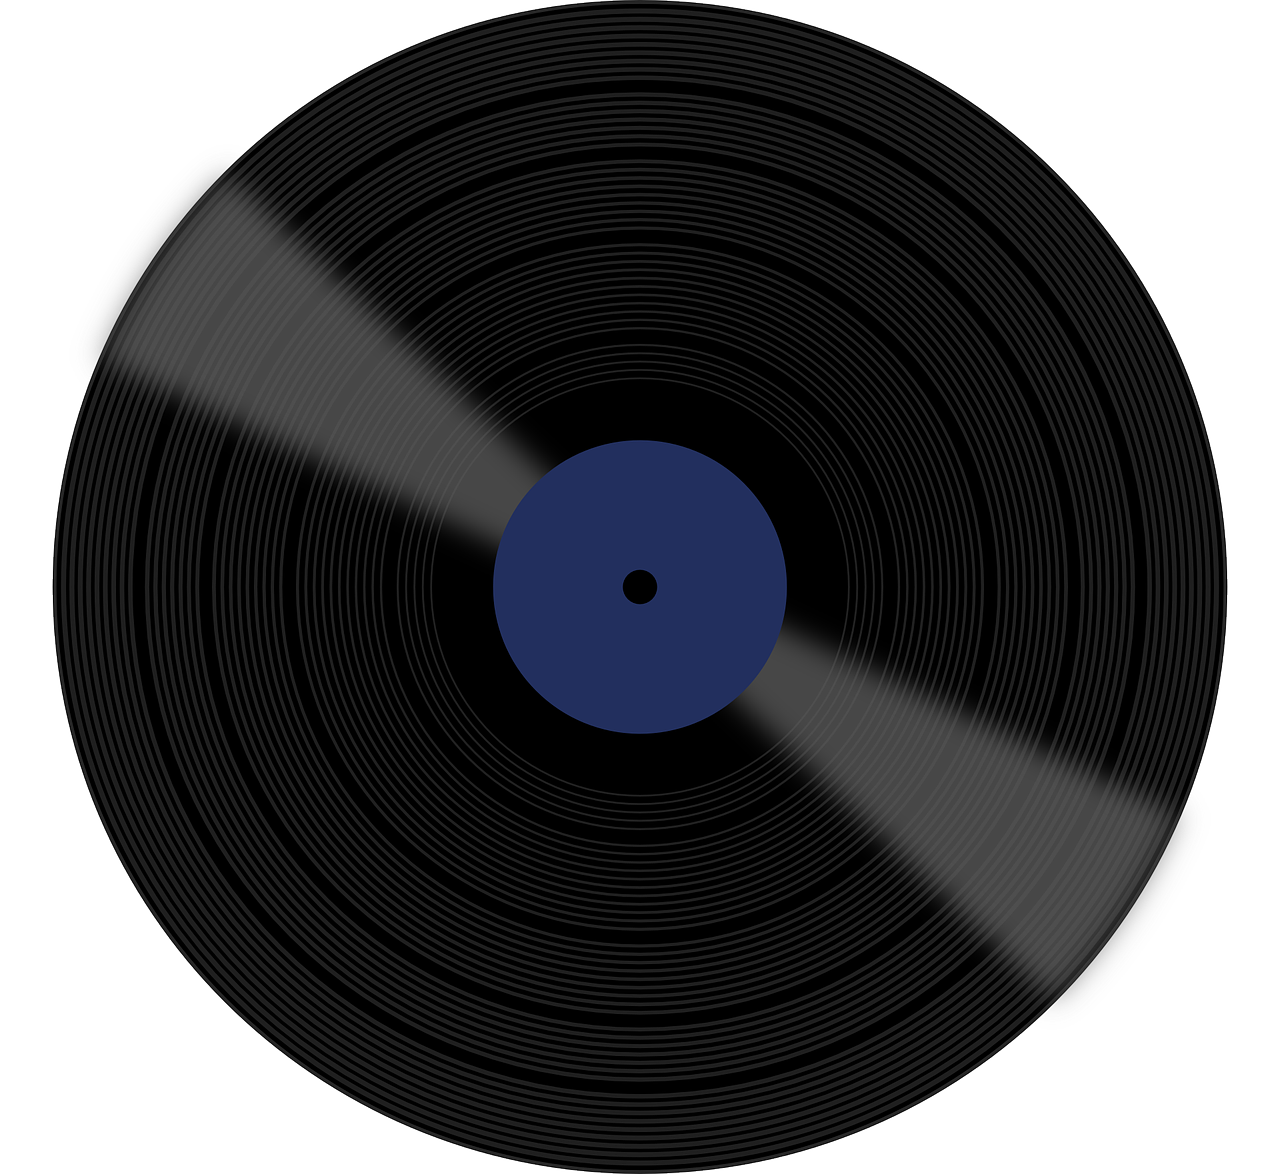 a black vinyl record on a white background, an album cover, pixabay, !!! very coherent!!! vector art, blues, japan, lined up horizontally